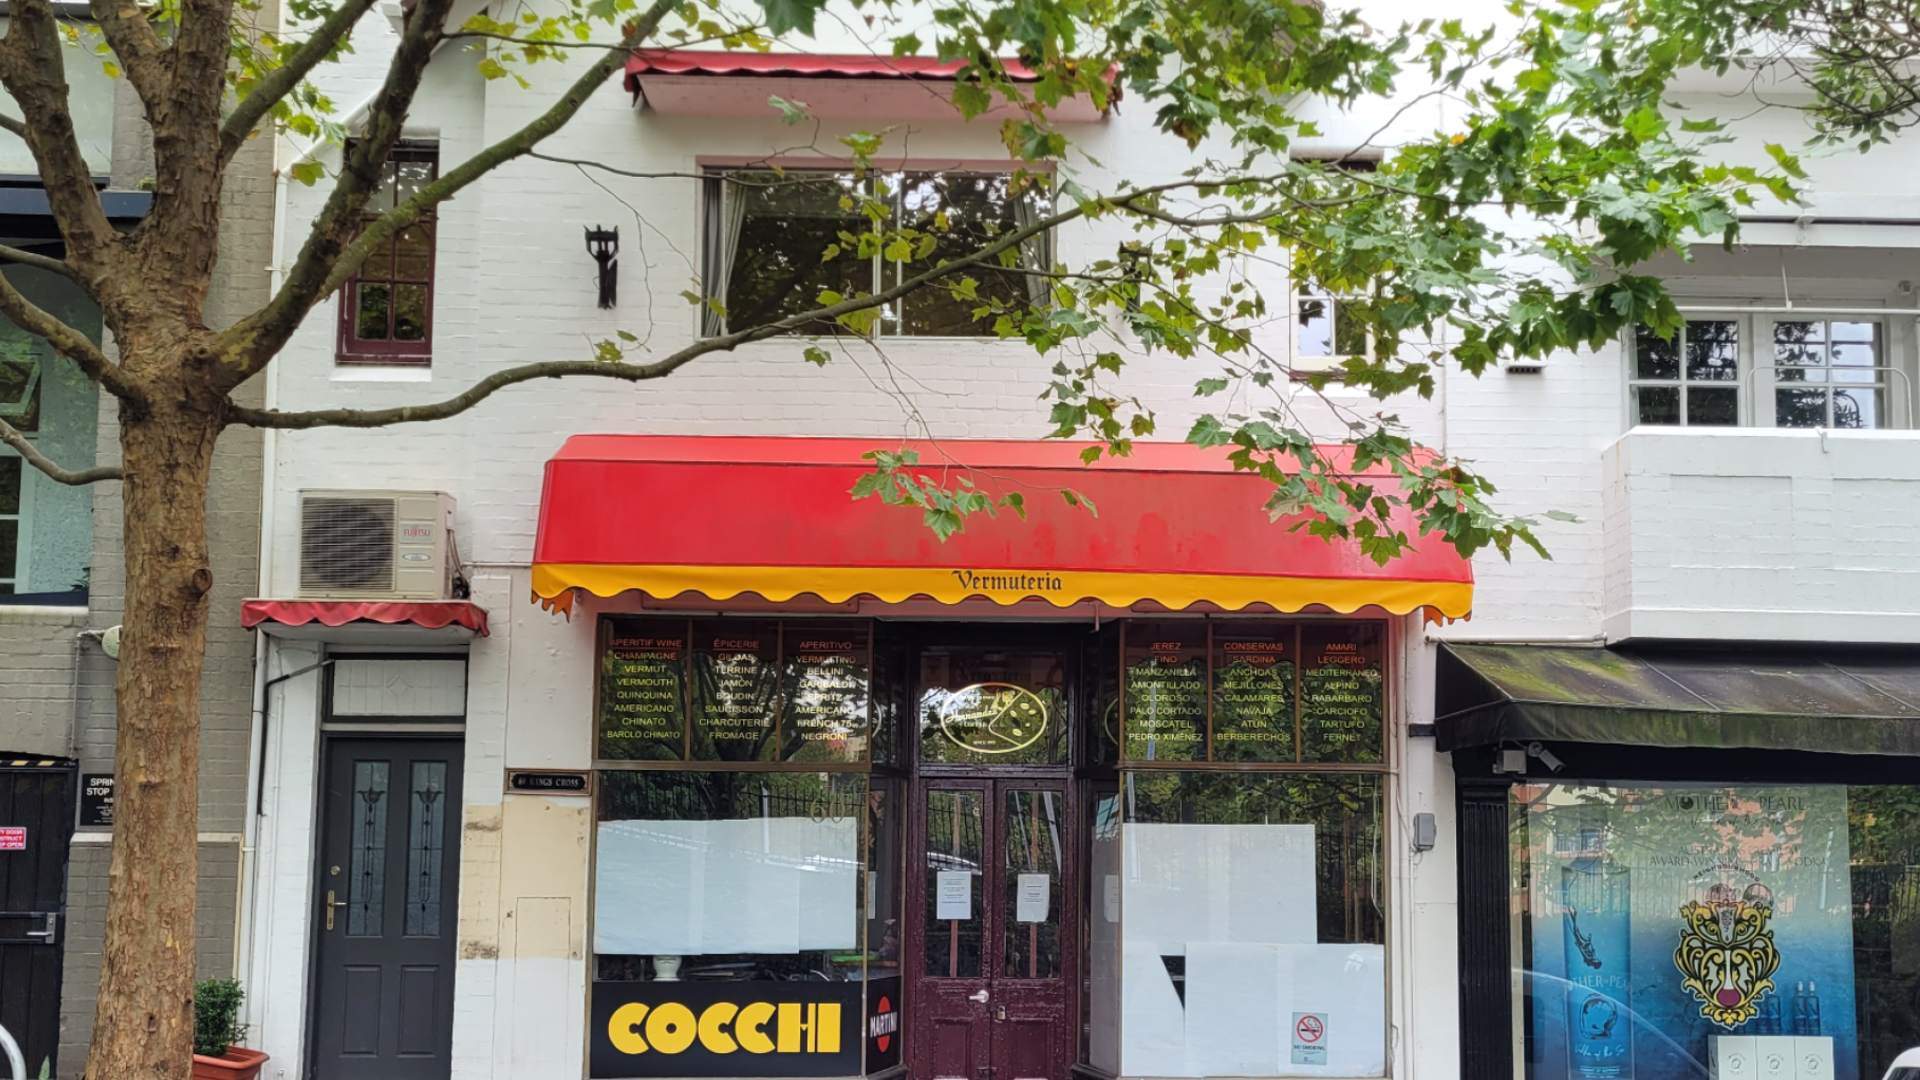 Piccolo Bar's David Spanton Is Reimagining the Former Cafe Hernandez Space as a Vermuteria